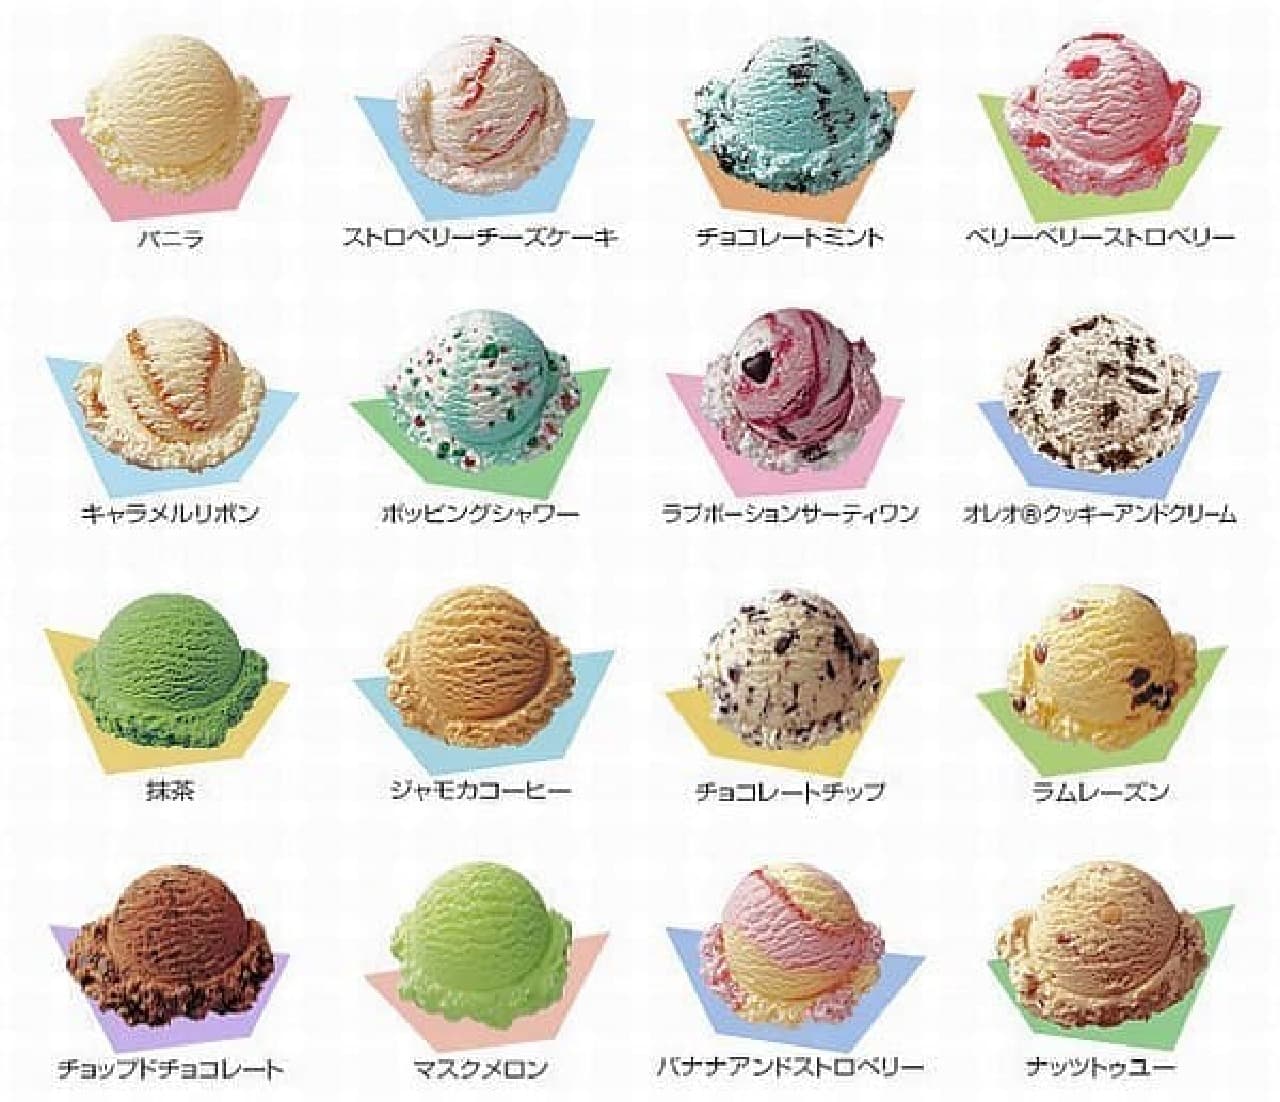 Thirty One Ice Cream Part of Standard Flavor (Source: Thirty One Ice Cream)